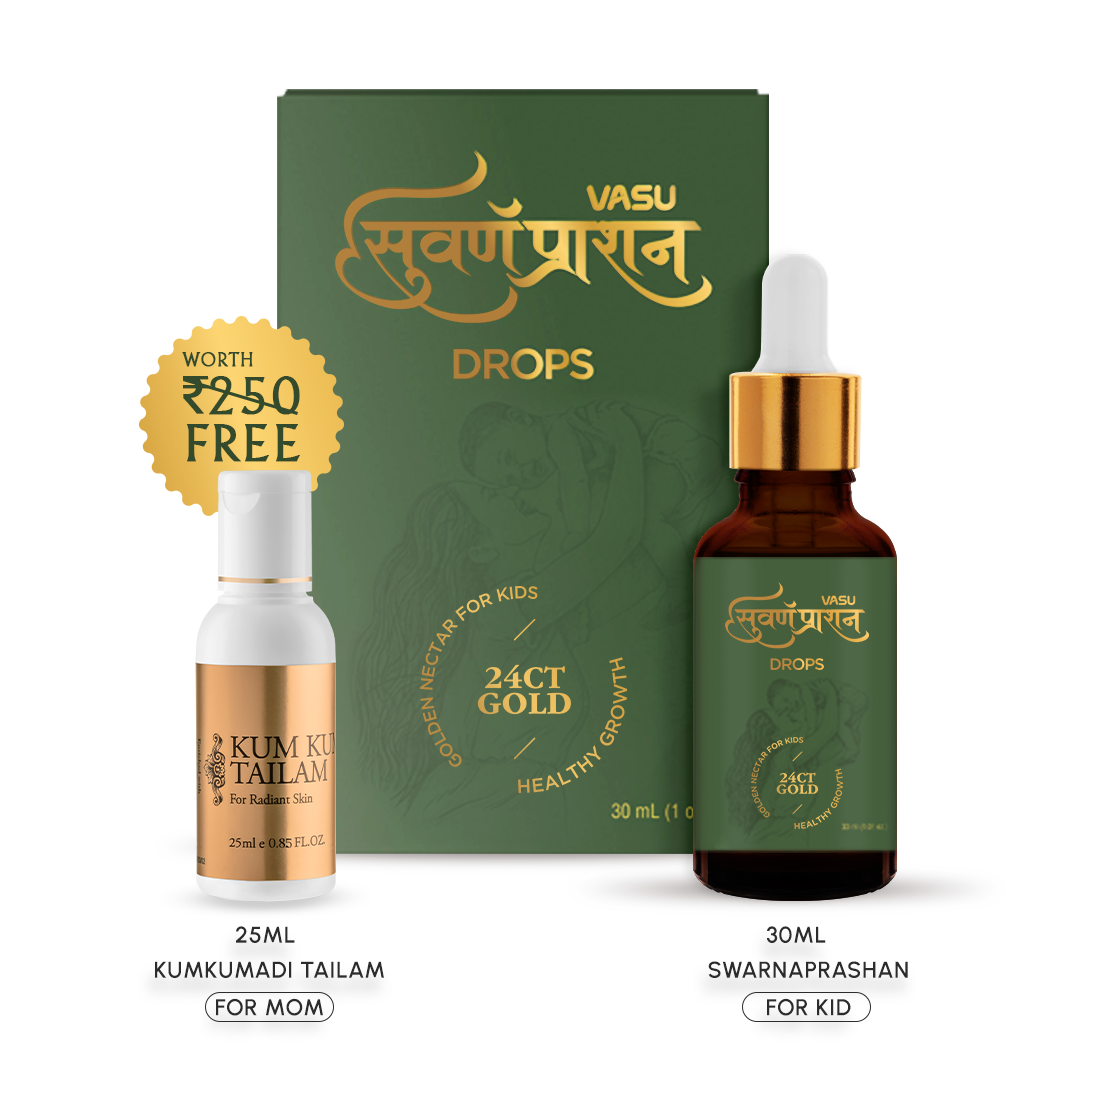 Vasu Swarnaprashan for Kids 30ml - Formulated with Pure 24CT Gold - Healthy Growth - Golden Nectar For Kids - Boosts Kids Intellect - Improves Gut Health & Immunity Booster for Kids (0-16 Years)